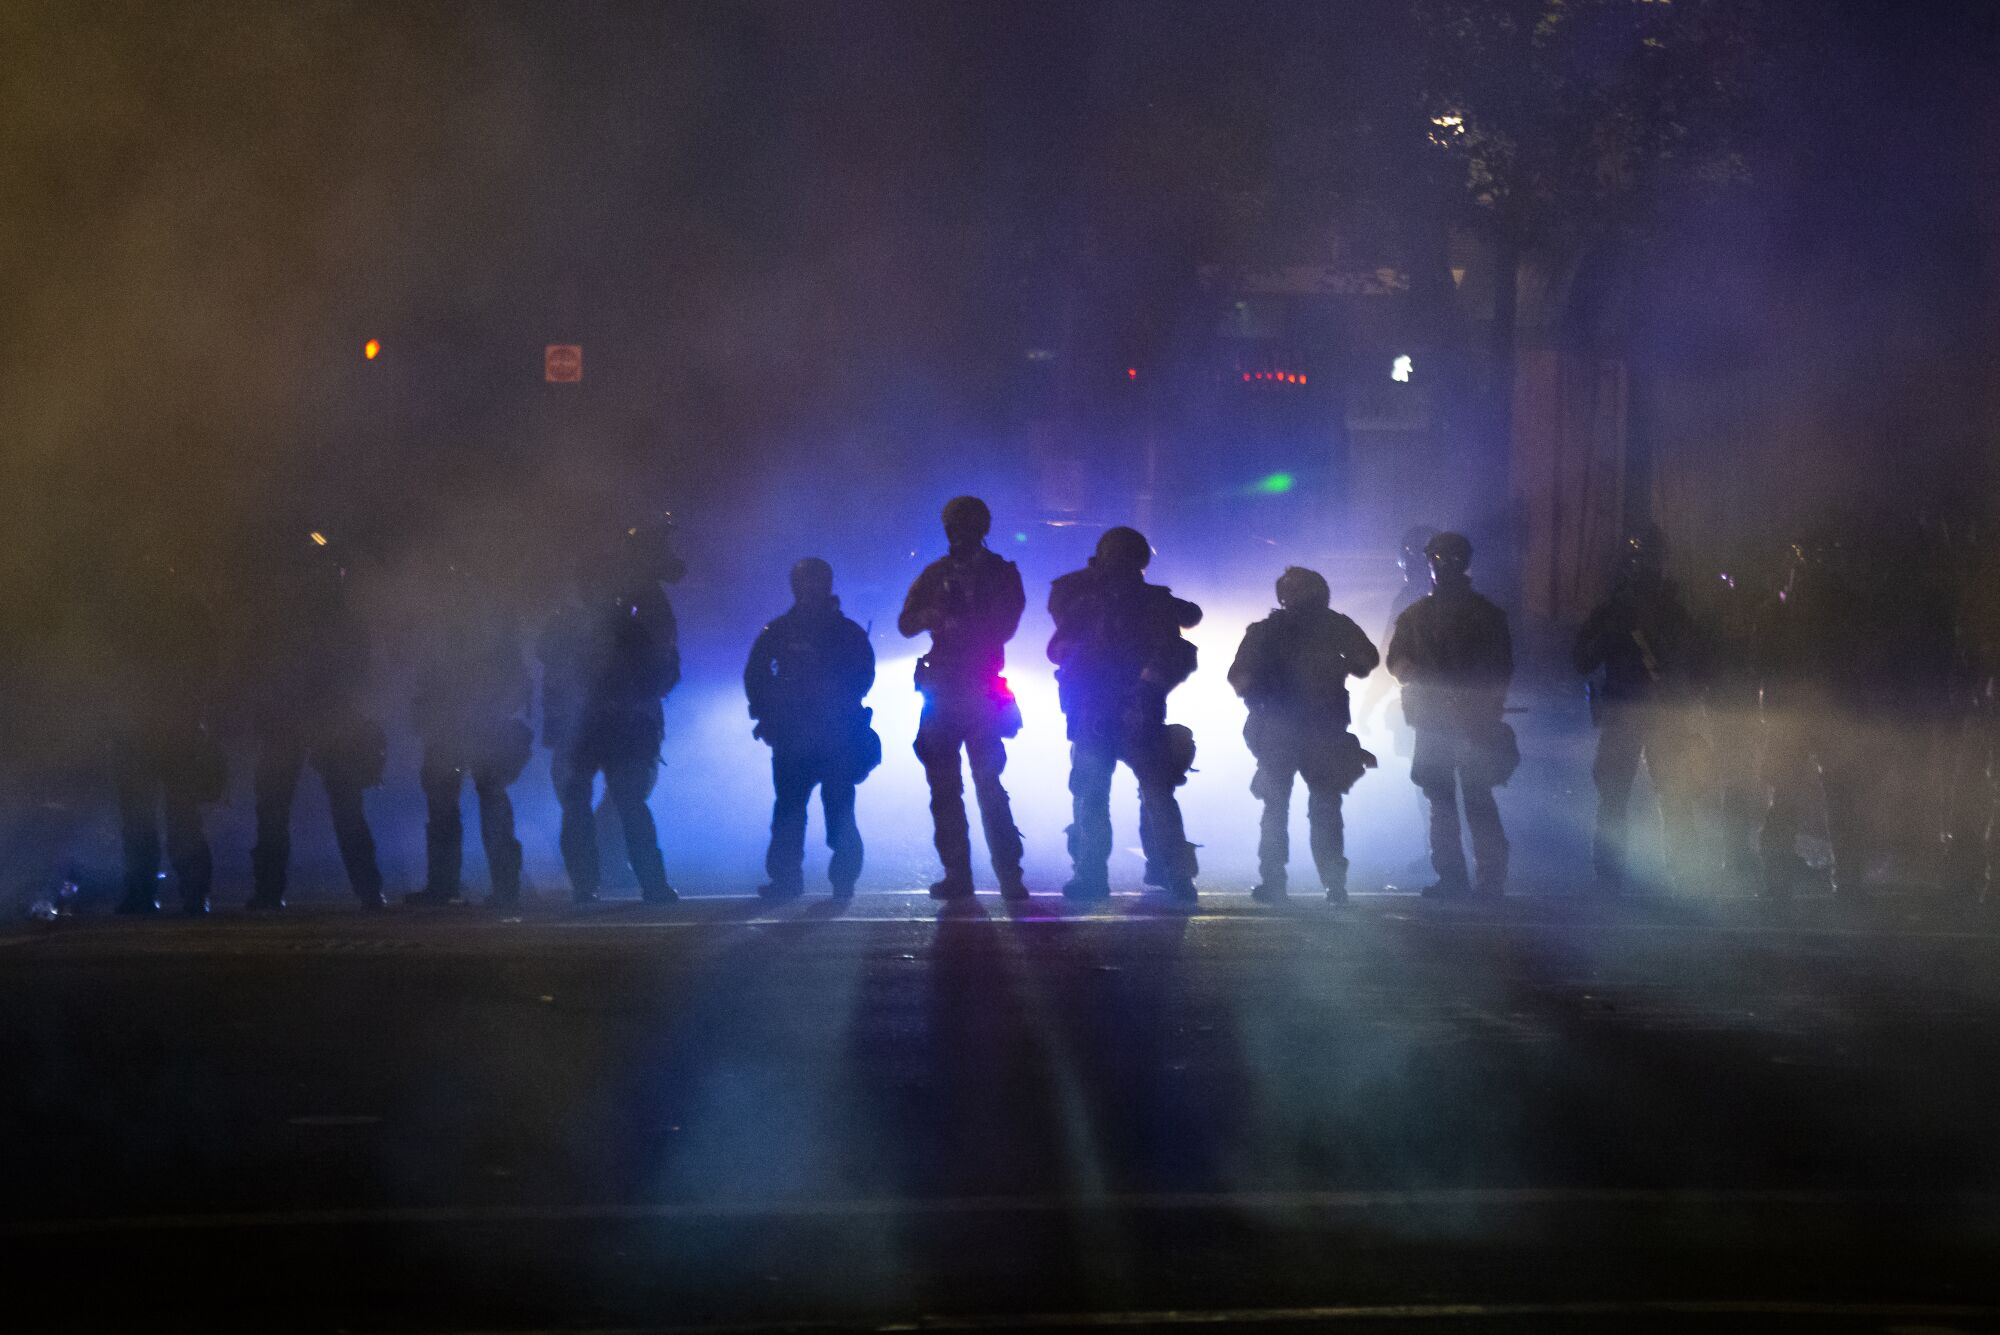 Federal officers walk through tear gas while dispersing a crowd at Mark O. Hatfield U.S. Courthouse in Portland, Ore.